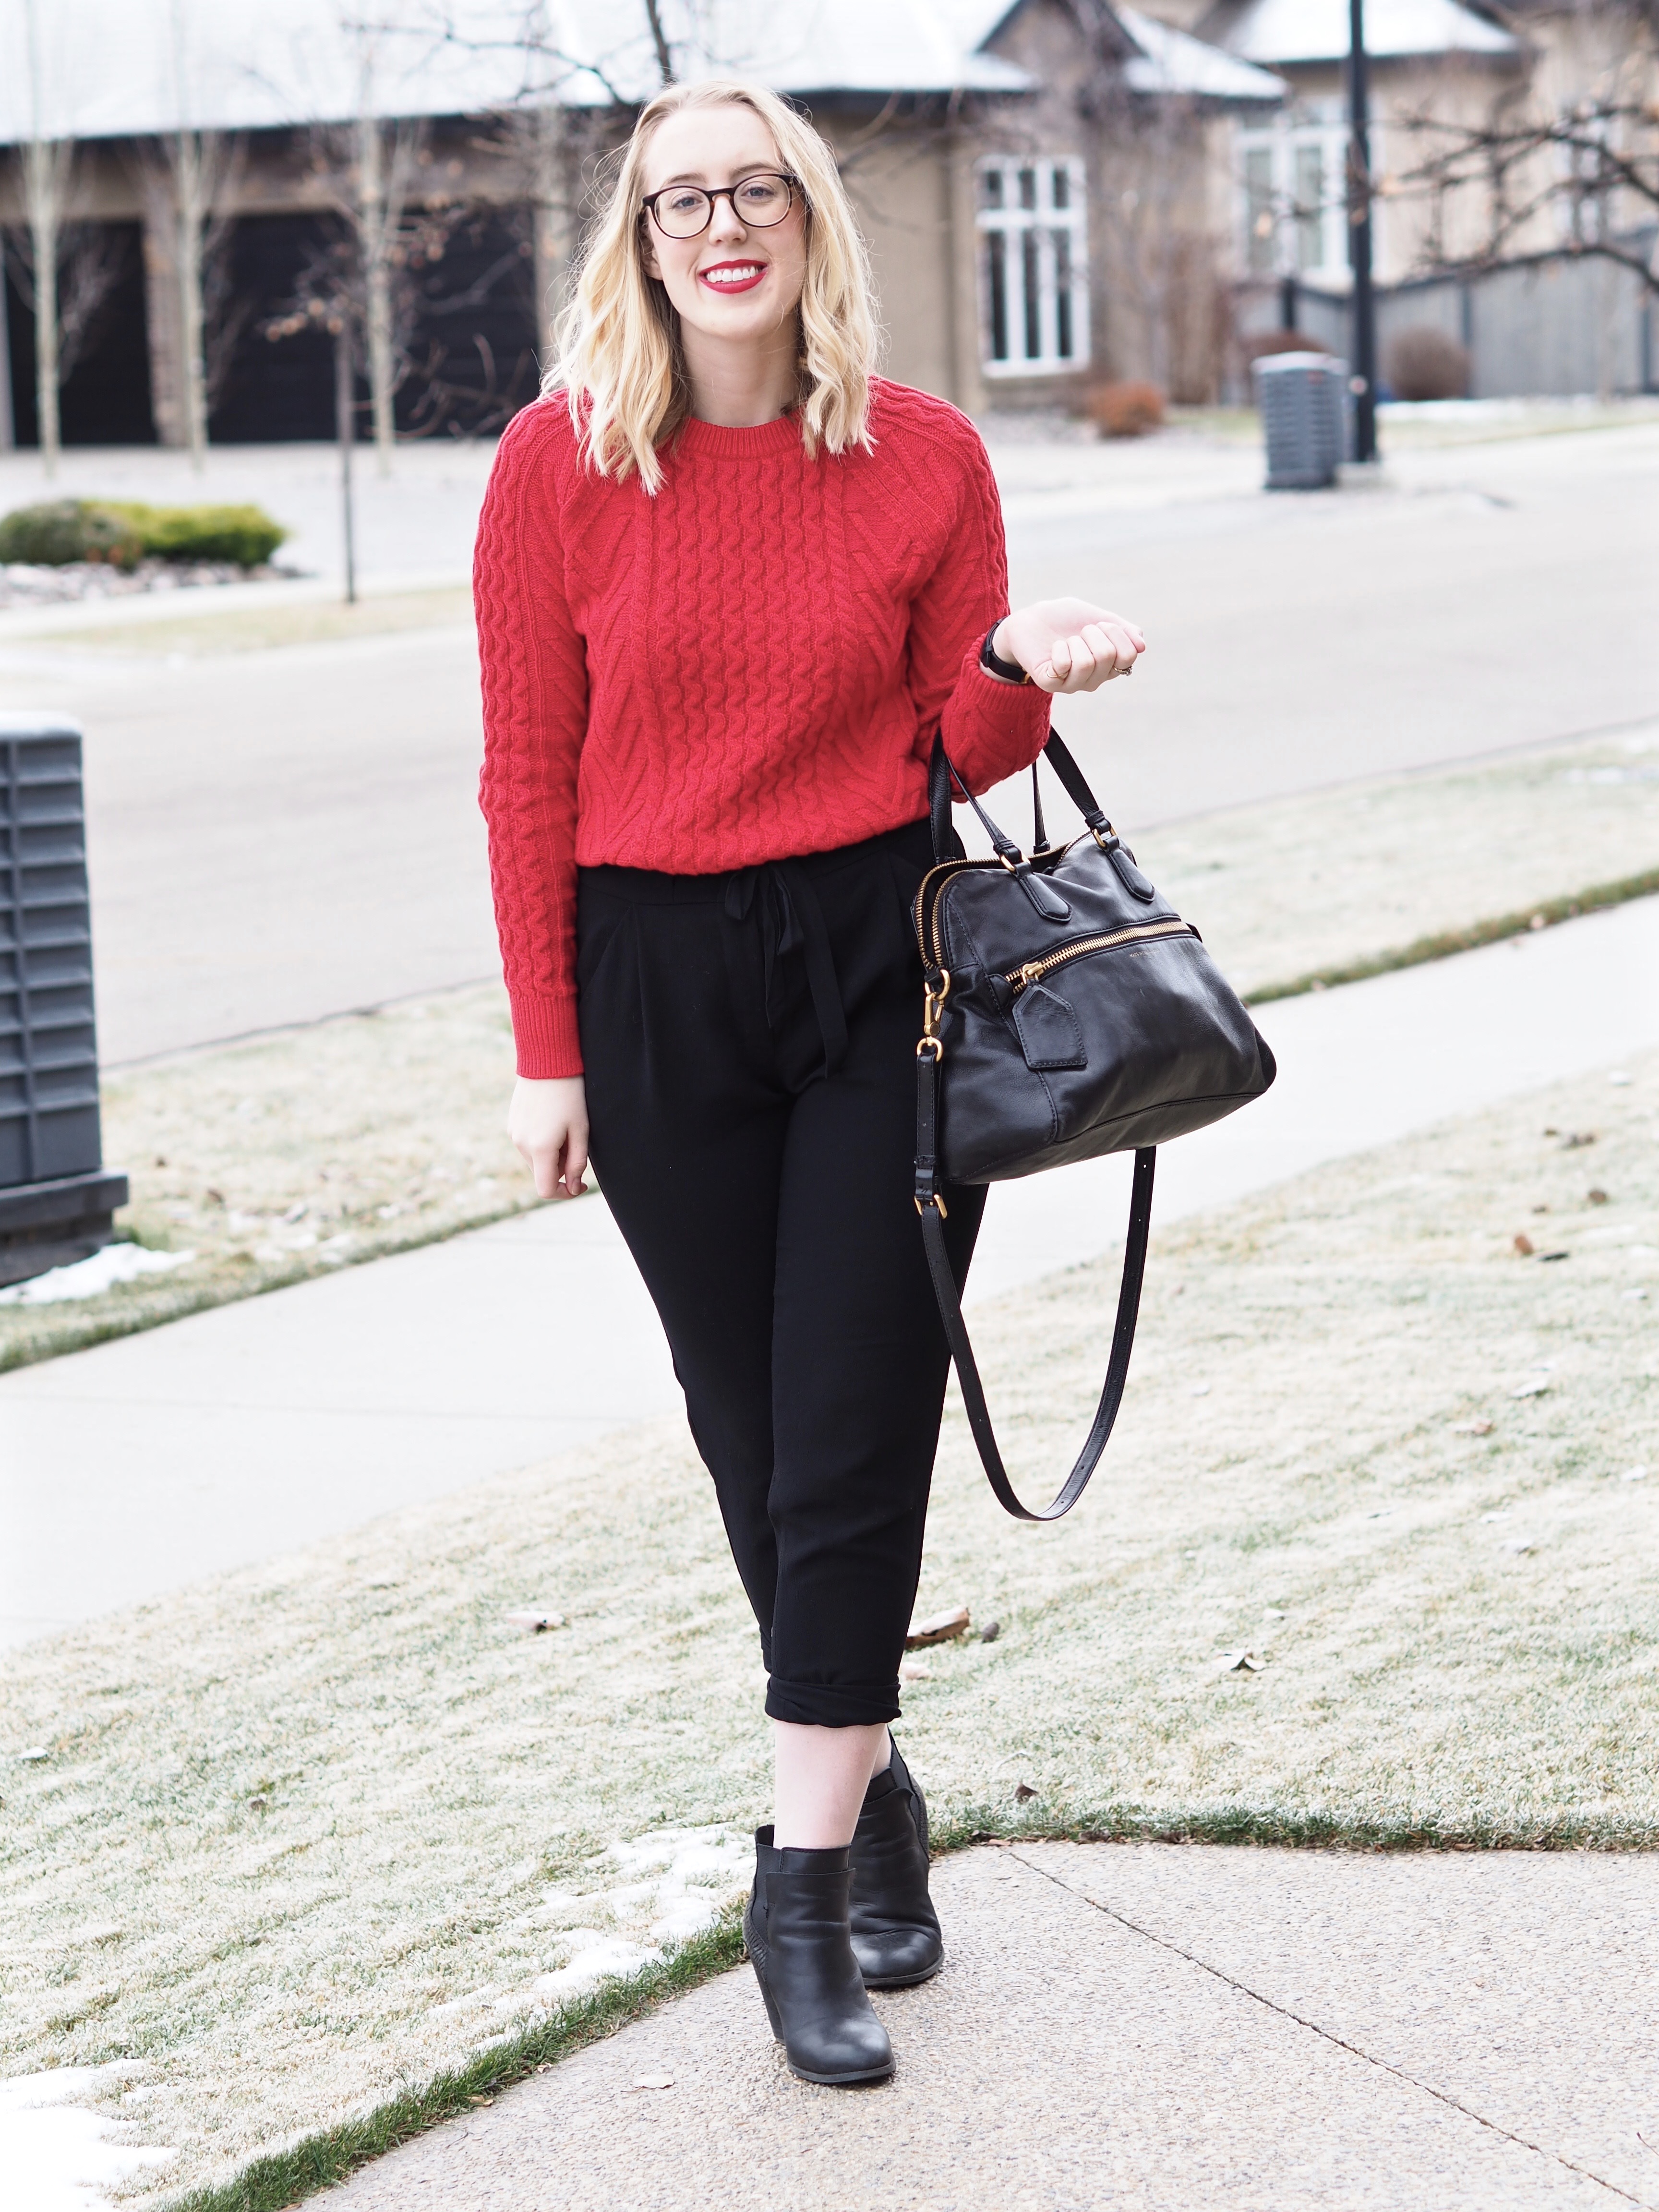 Red Cable Knit Sweater - Strung in Gold {Gap Sweater, Aritzia Joggers, Marc by Marc Jacobs Purse, Aldo Booties, MAC Lipstick}